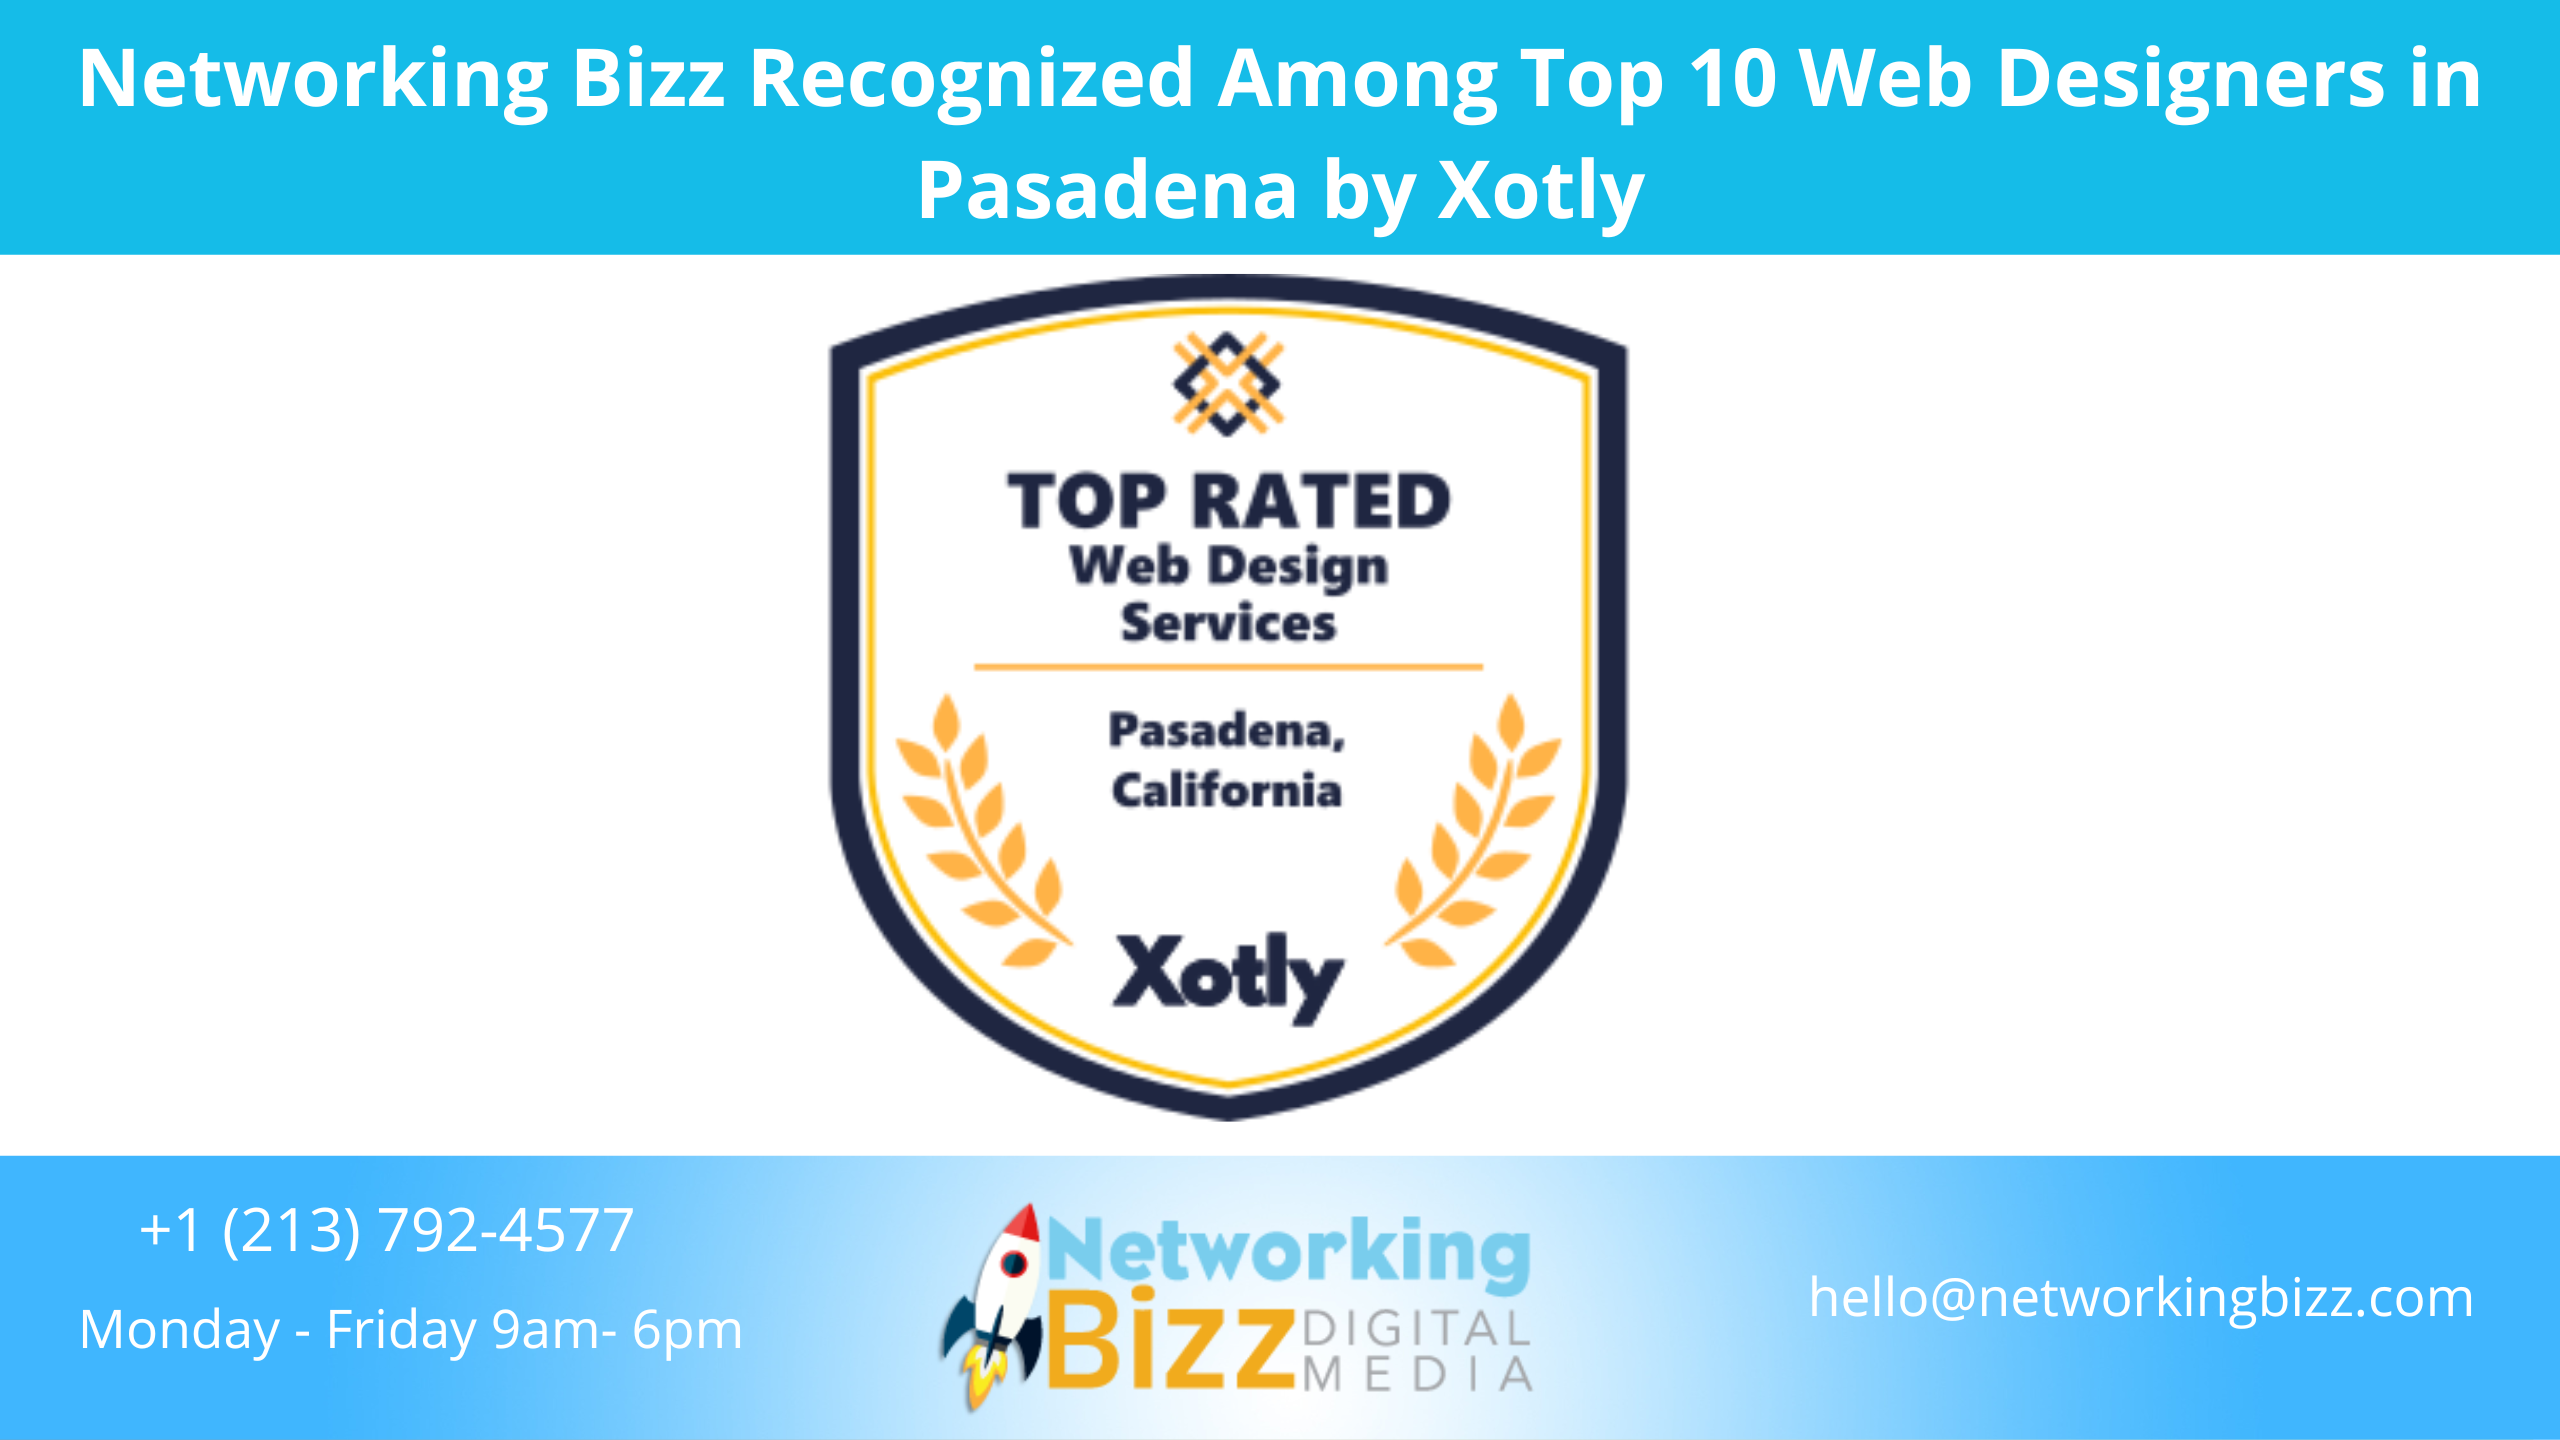 Networking Bizz Recognized Among Top 10 Web Designers in Pasadena by Xotly